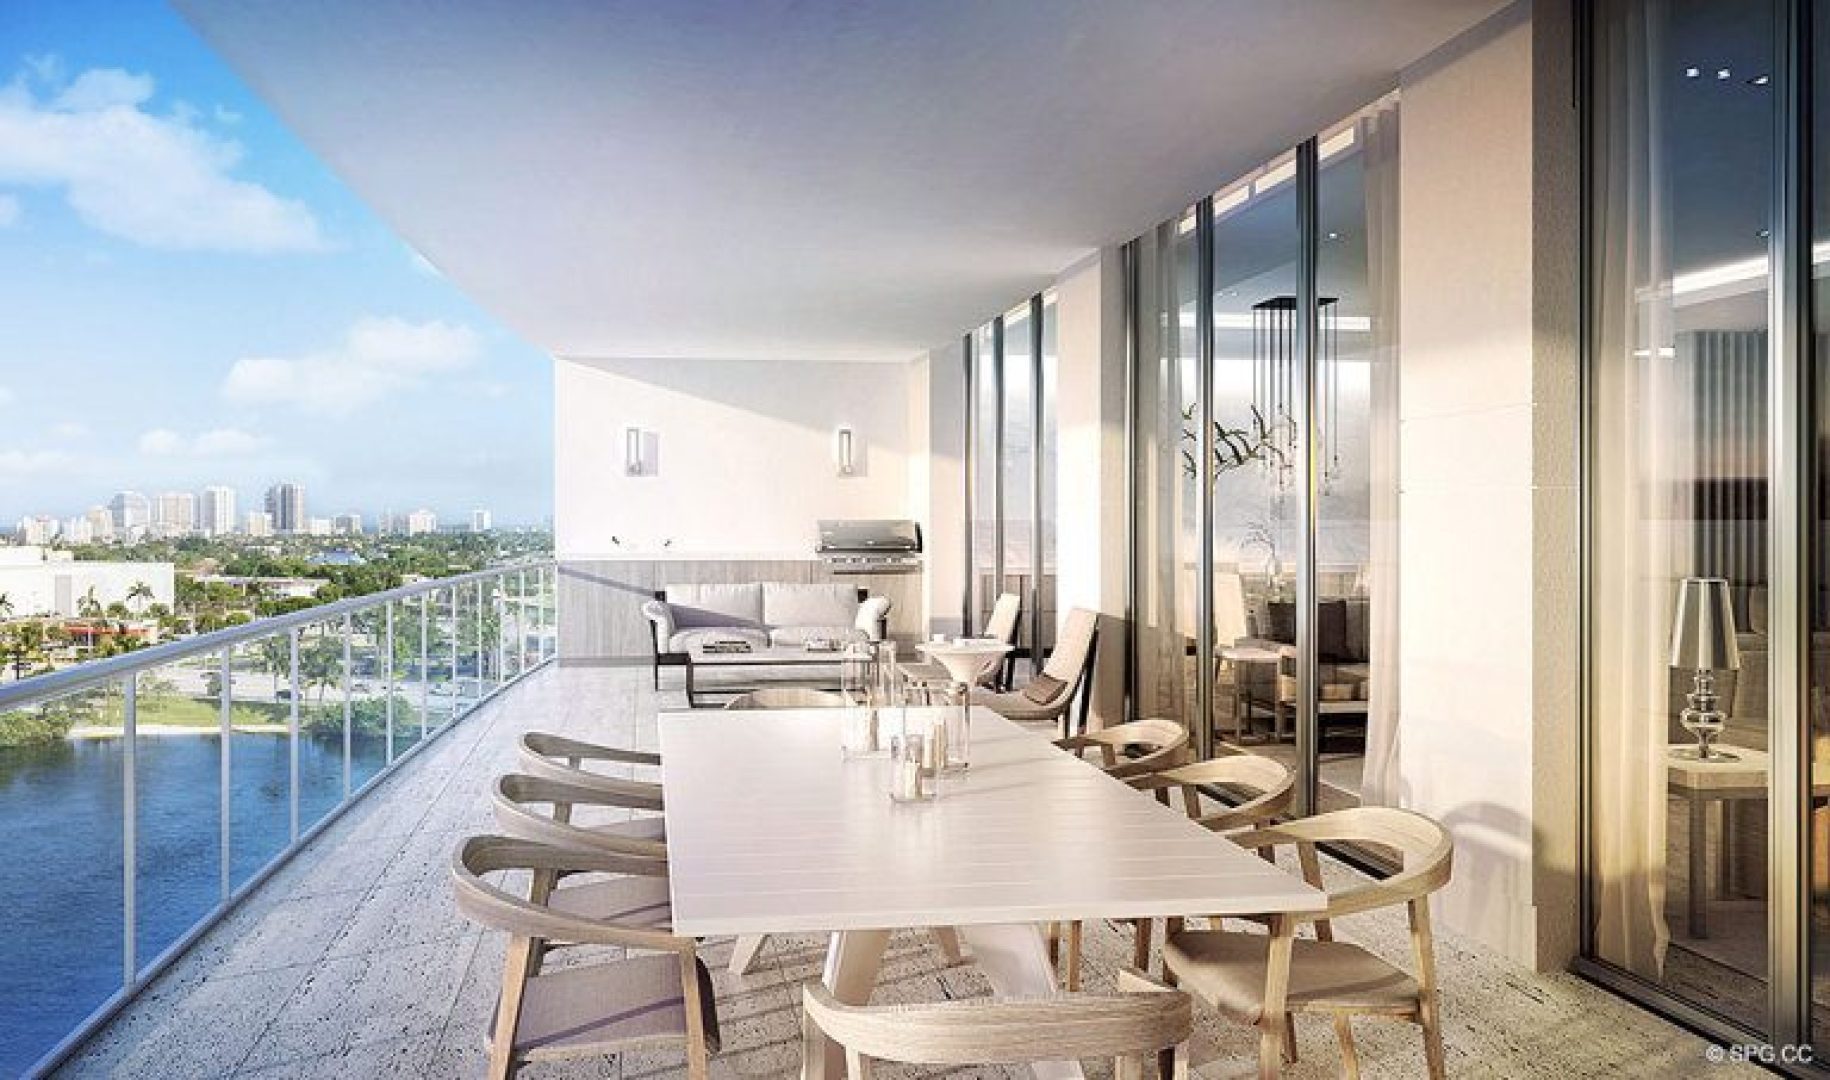 Large Private Terraces at Riva, Luxury Waterfront Condos in Fort Lauderdale, Florida 33304.